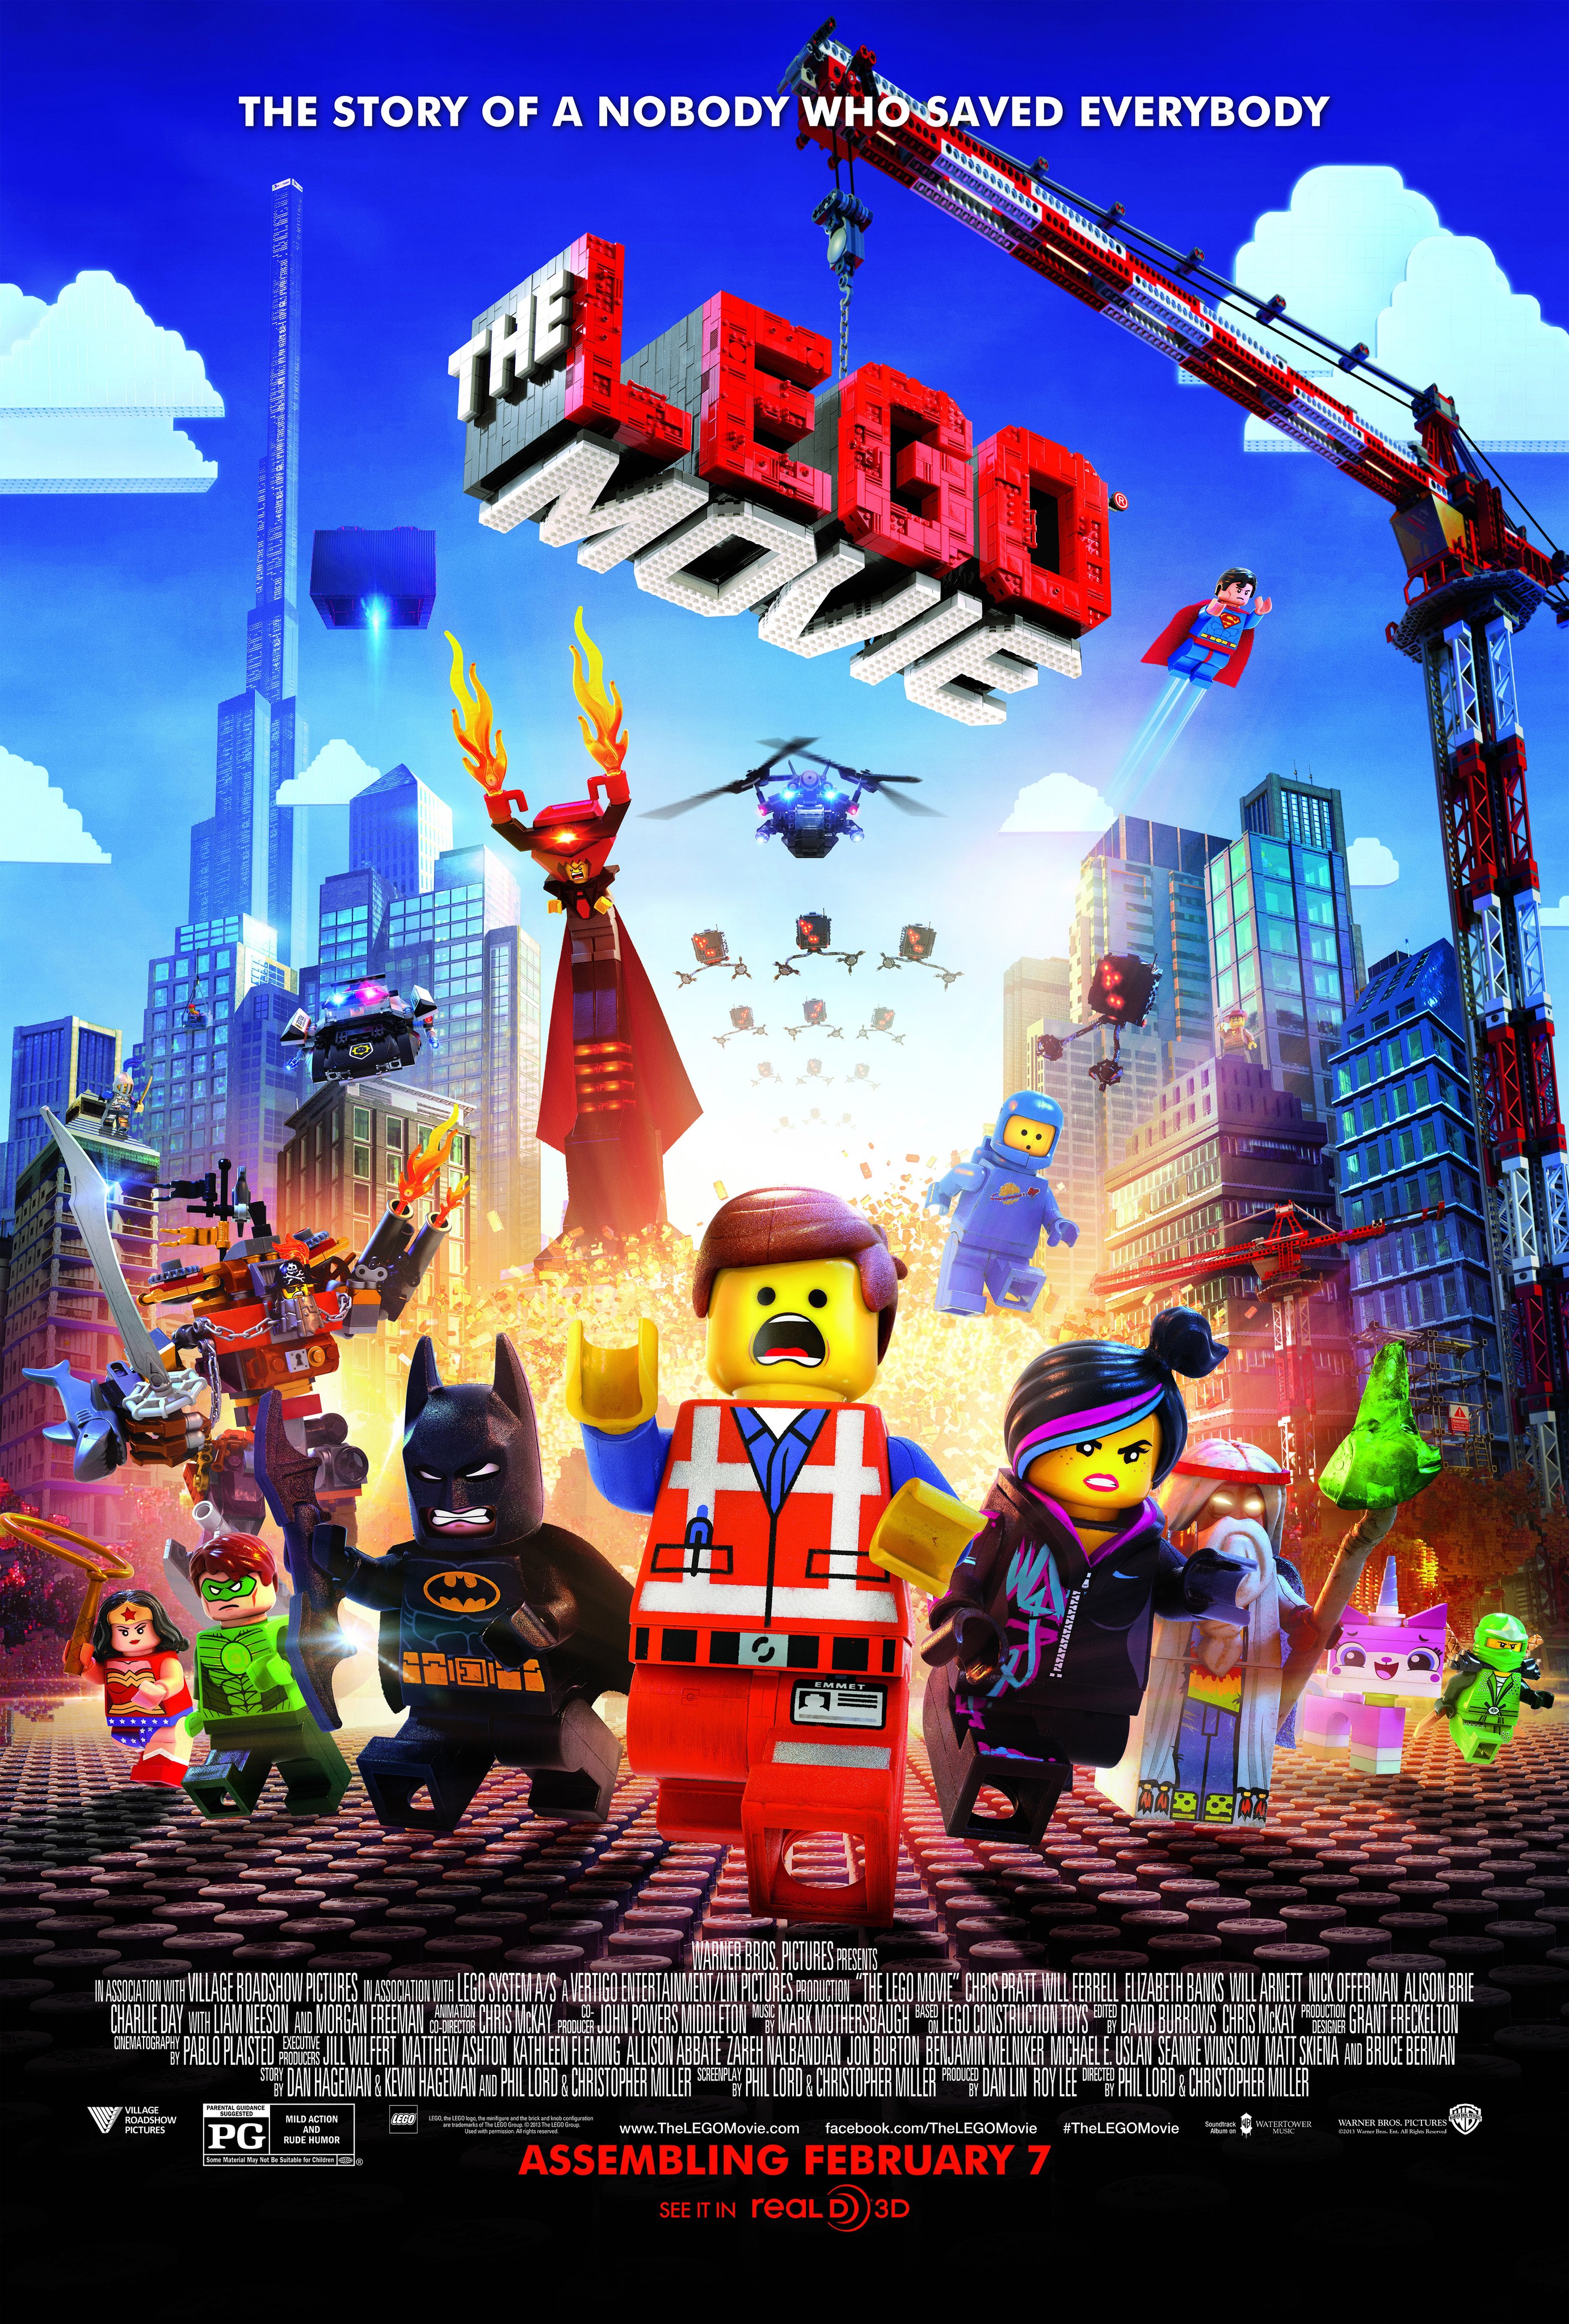 5 Reasons Why We Love LEGO Movies - Ed. Says - CATCHPLAY+｜HD